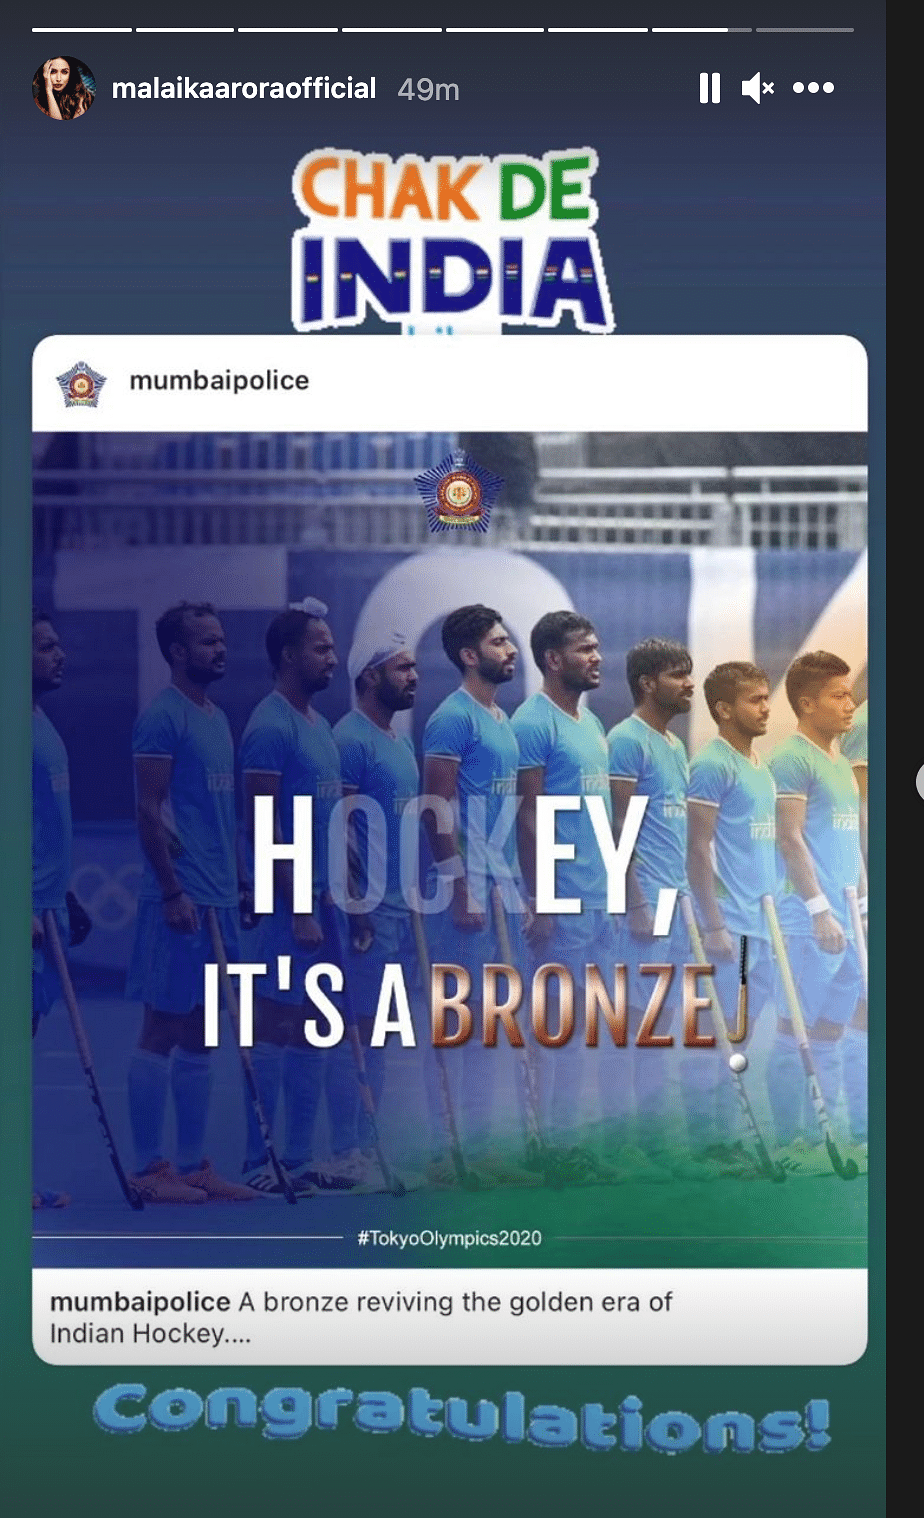 The Indian hockey team defeated Germany 5-4 in the Bronze medal match at the 2020 Tokyo Olympics. 